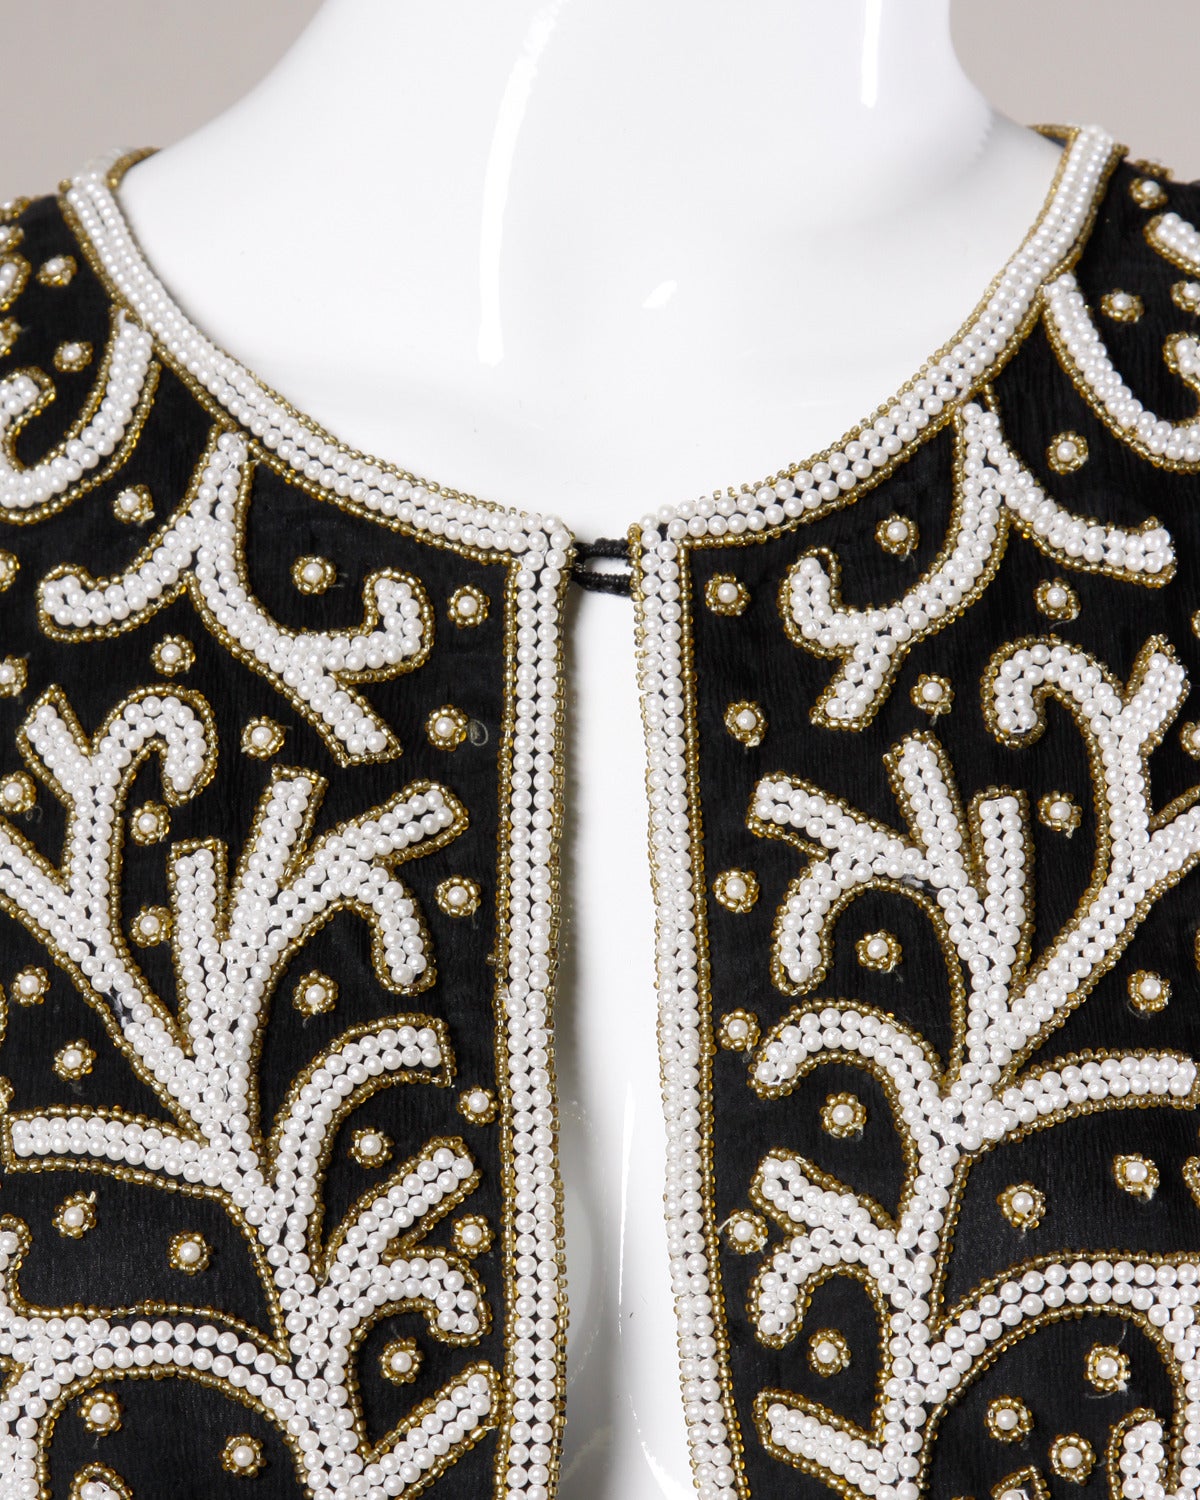 Heavily beaded silk jacket with a pearl and seed beaded design.

Details:

Fully Lined
Front Hook Closure
Marked Size: Not Marked
Estimated Size: Medium
Color: Black/ White Iridescent/ Gold Iridescent
Fabric: 100% Silk/ Rayon